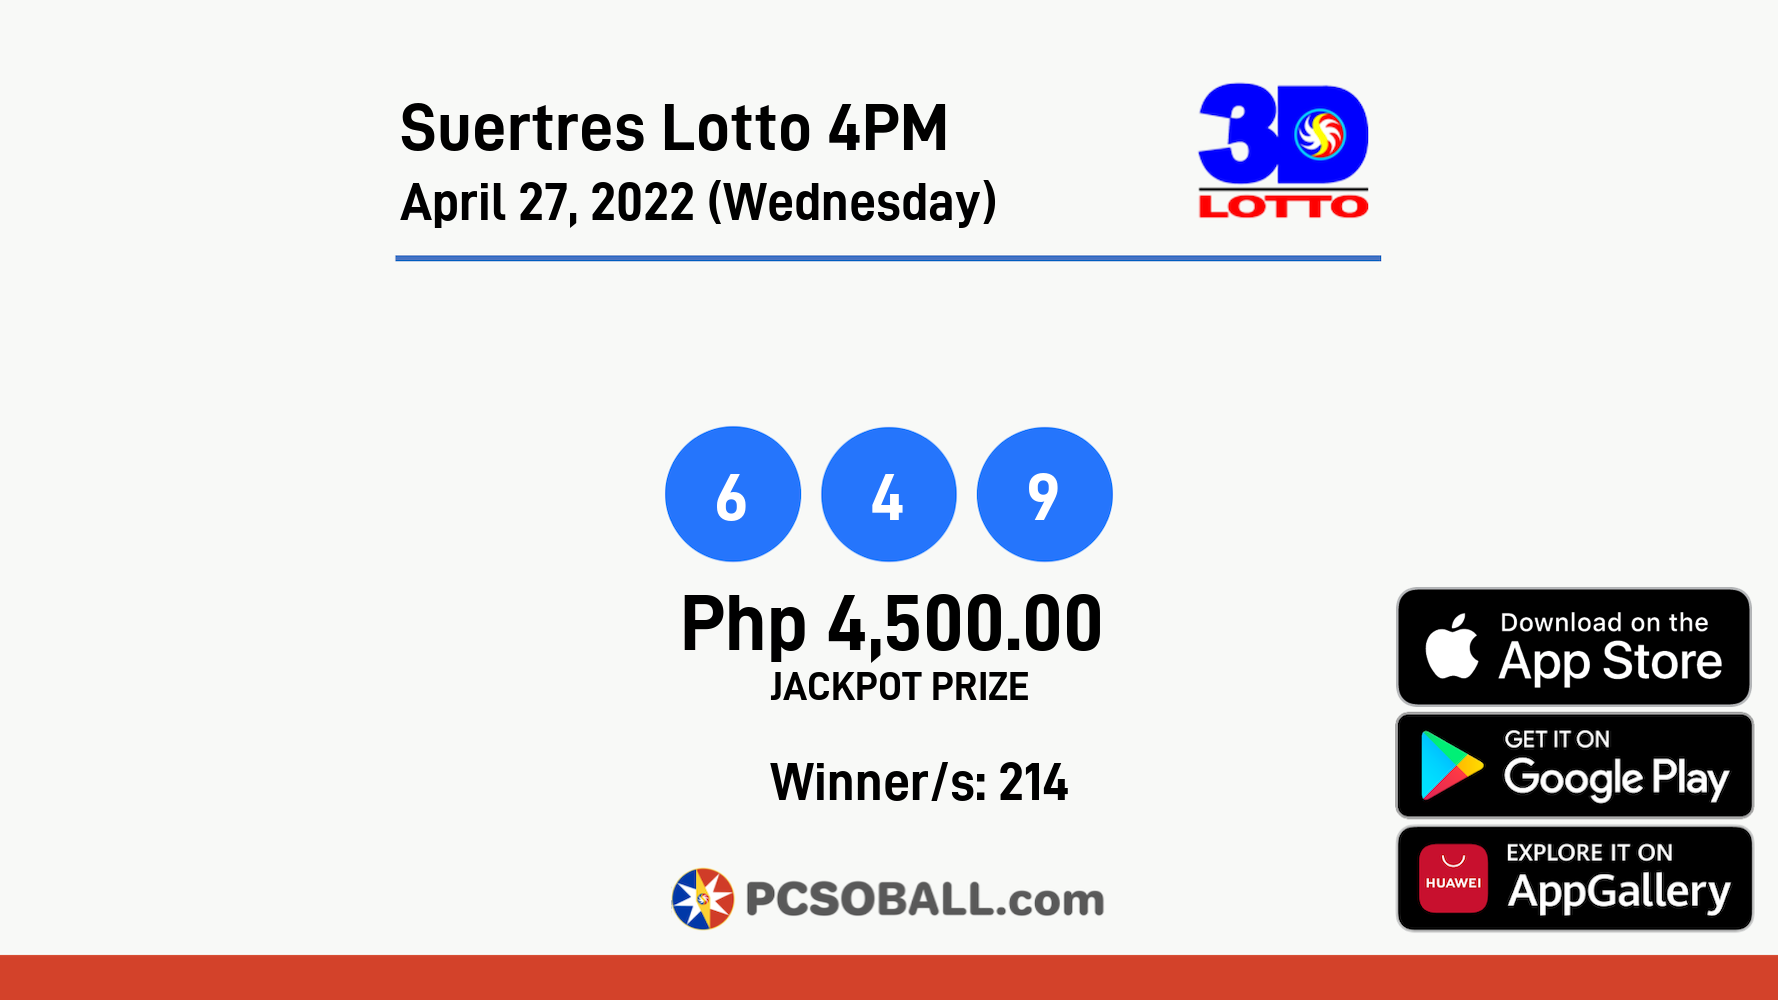 Suertres Lotto 4PM April 27, 2022 (Wednesday) Result